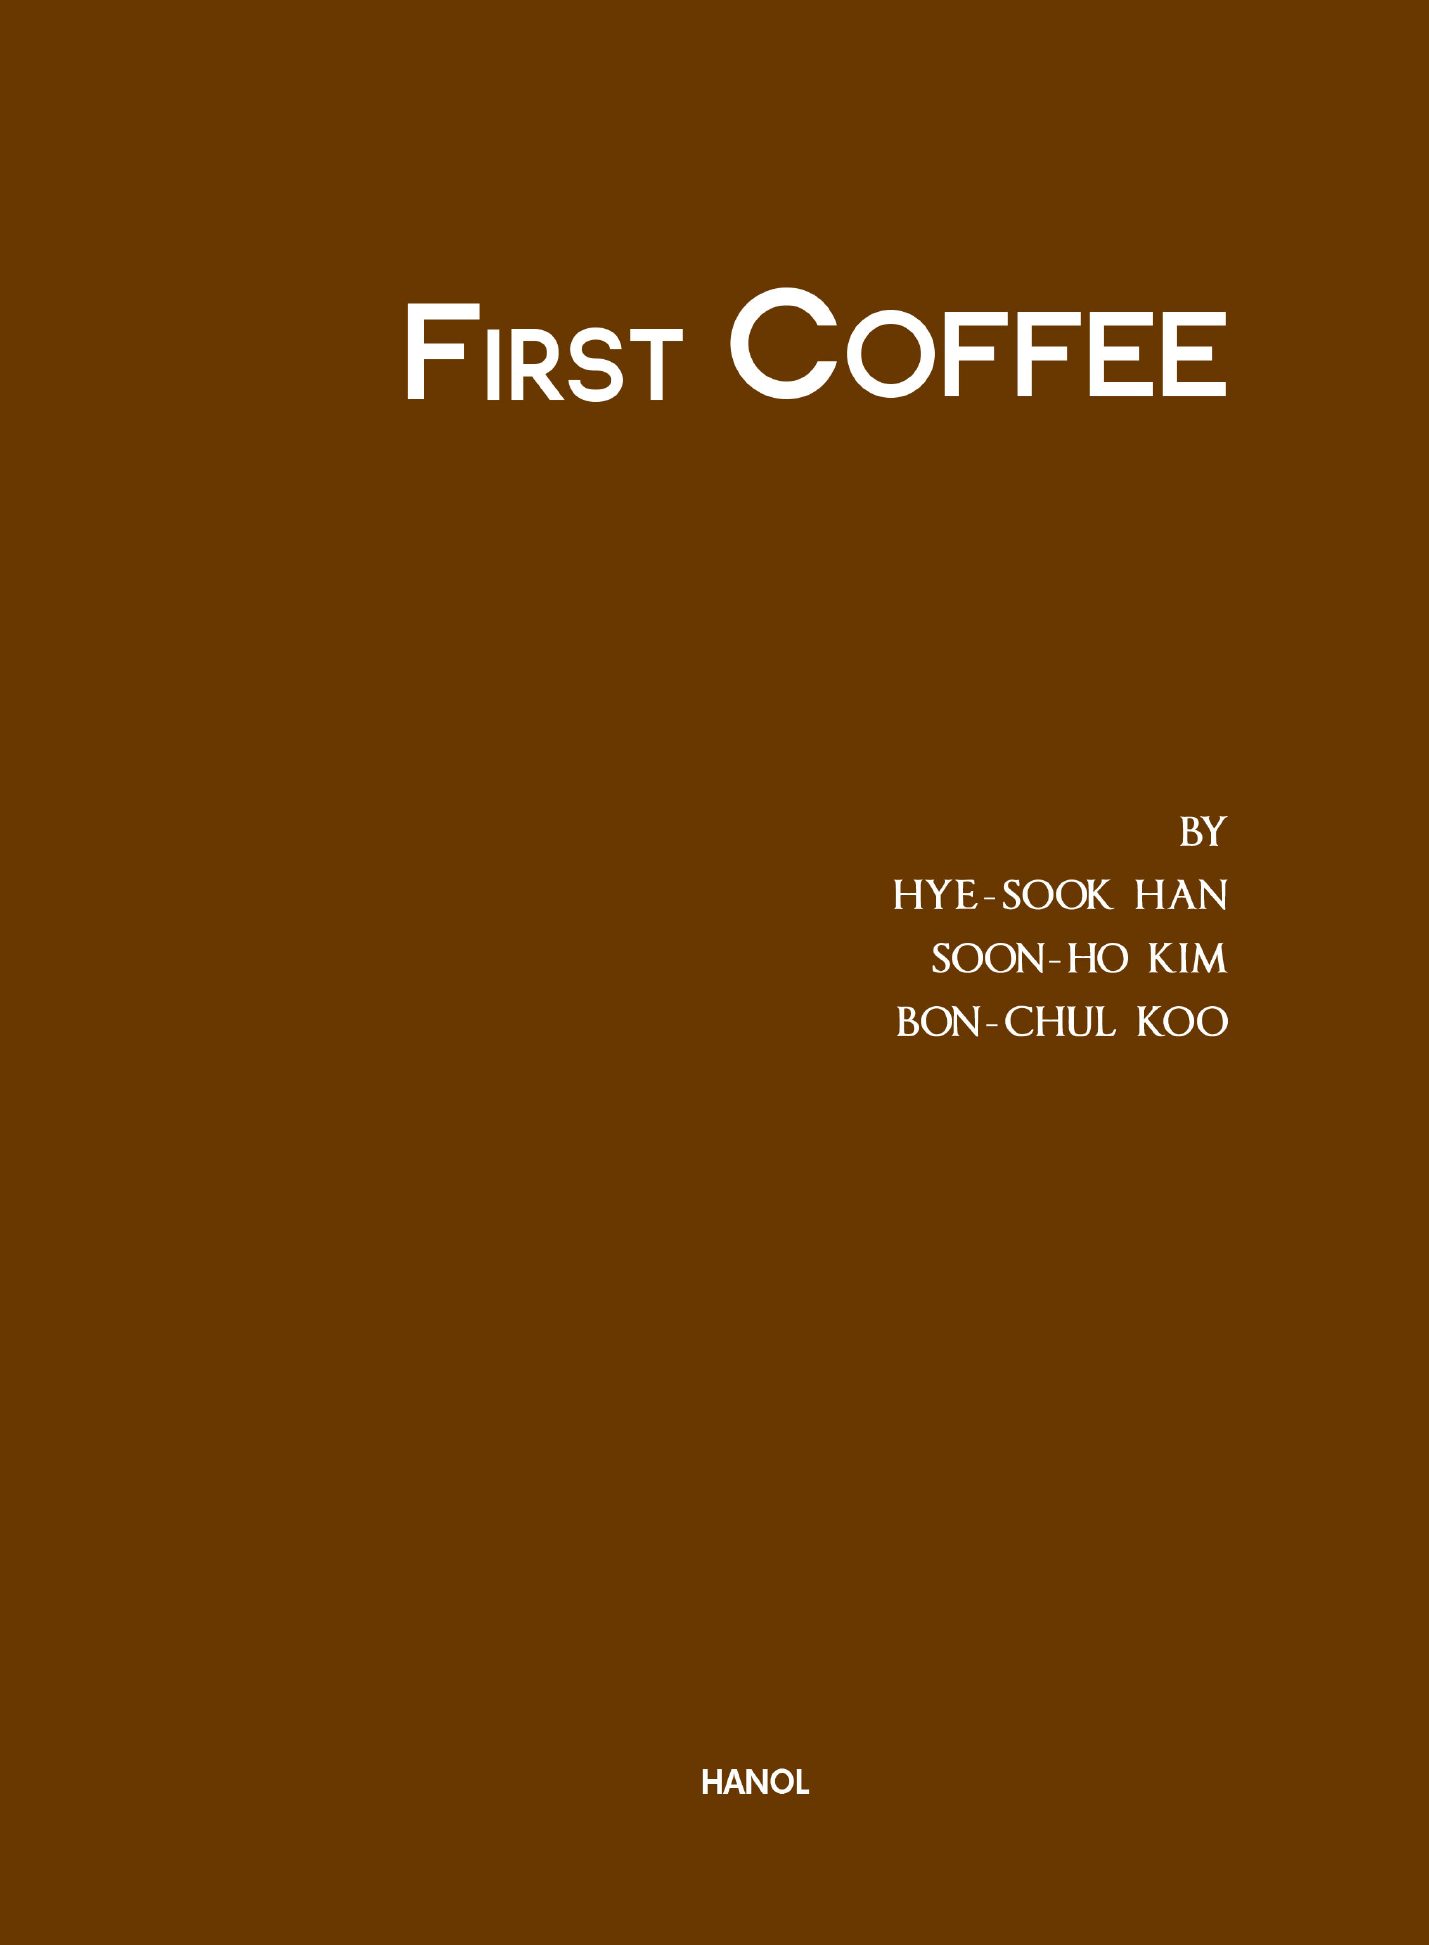 FIRST COFFEE